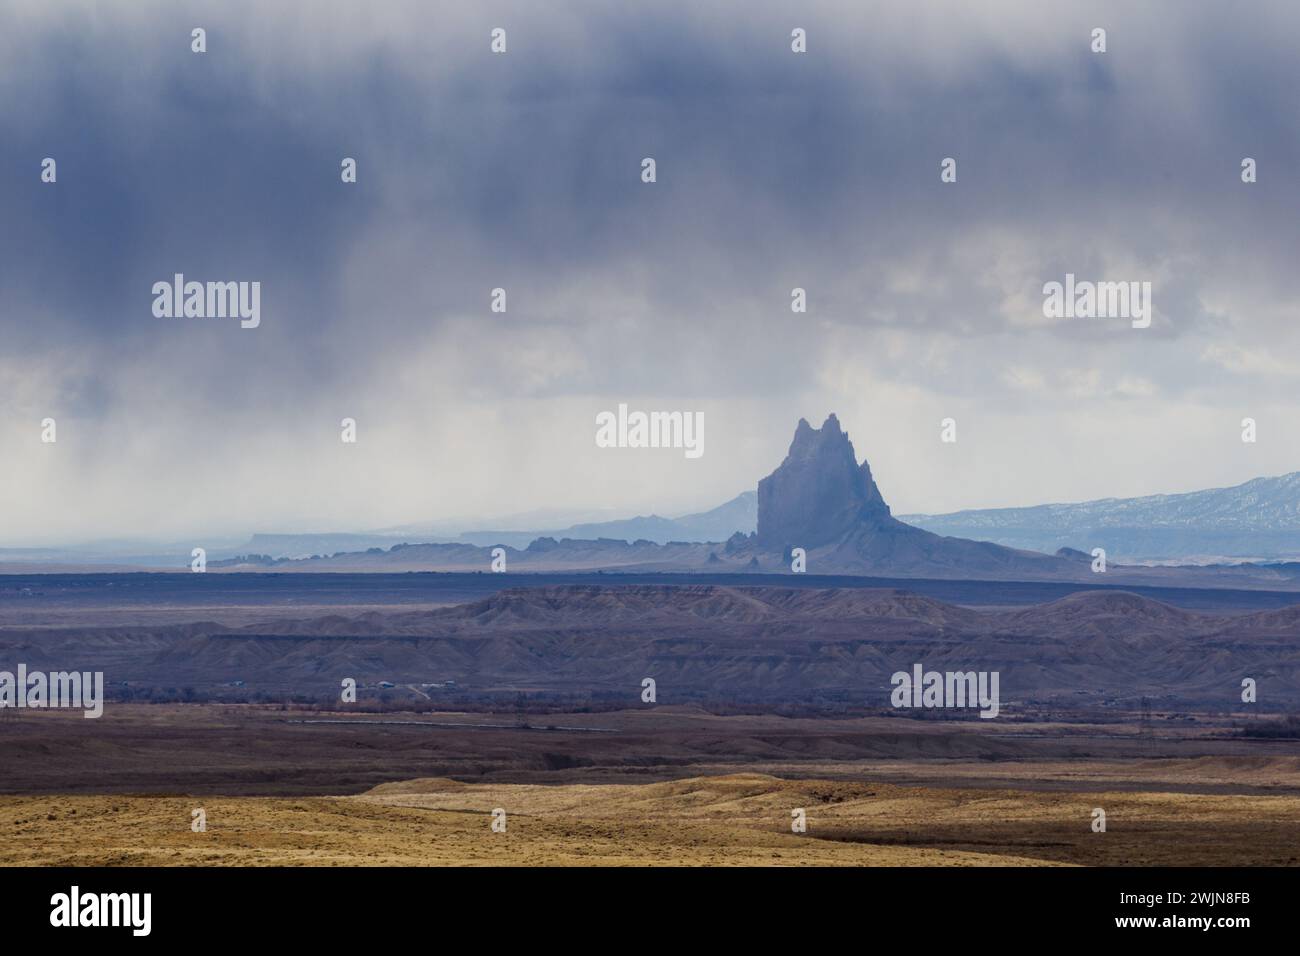 Shiprock is a volcanic basalt monolith on the Navajo Reservation near the town of Shiprock, New Mexico.  Virga is the name for these streaks of rain t Stock Photo